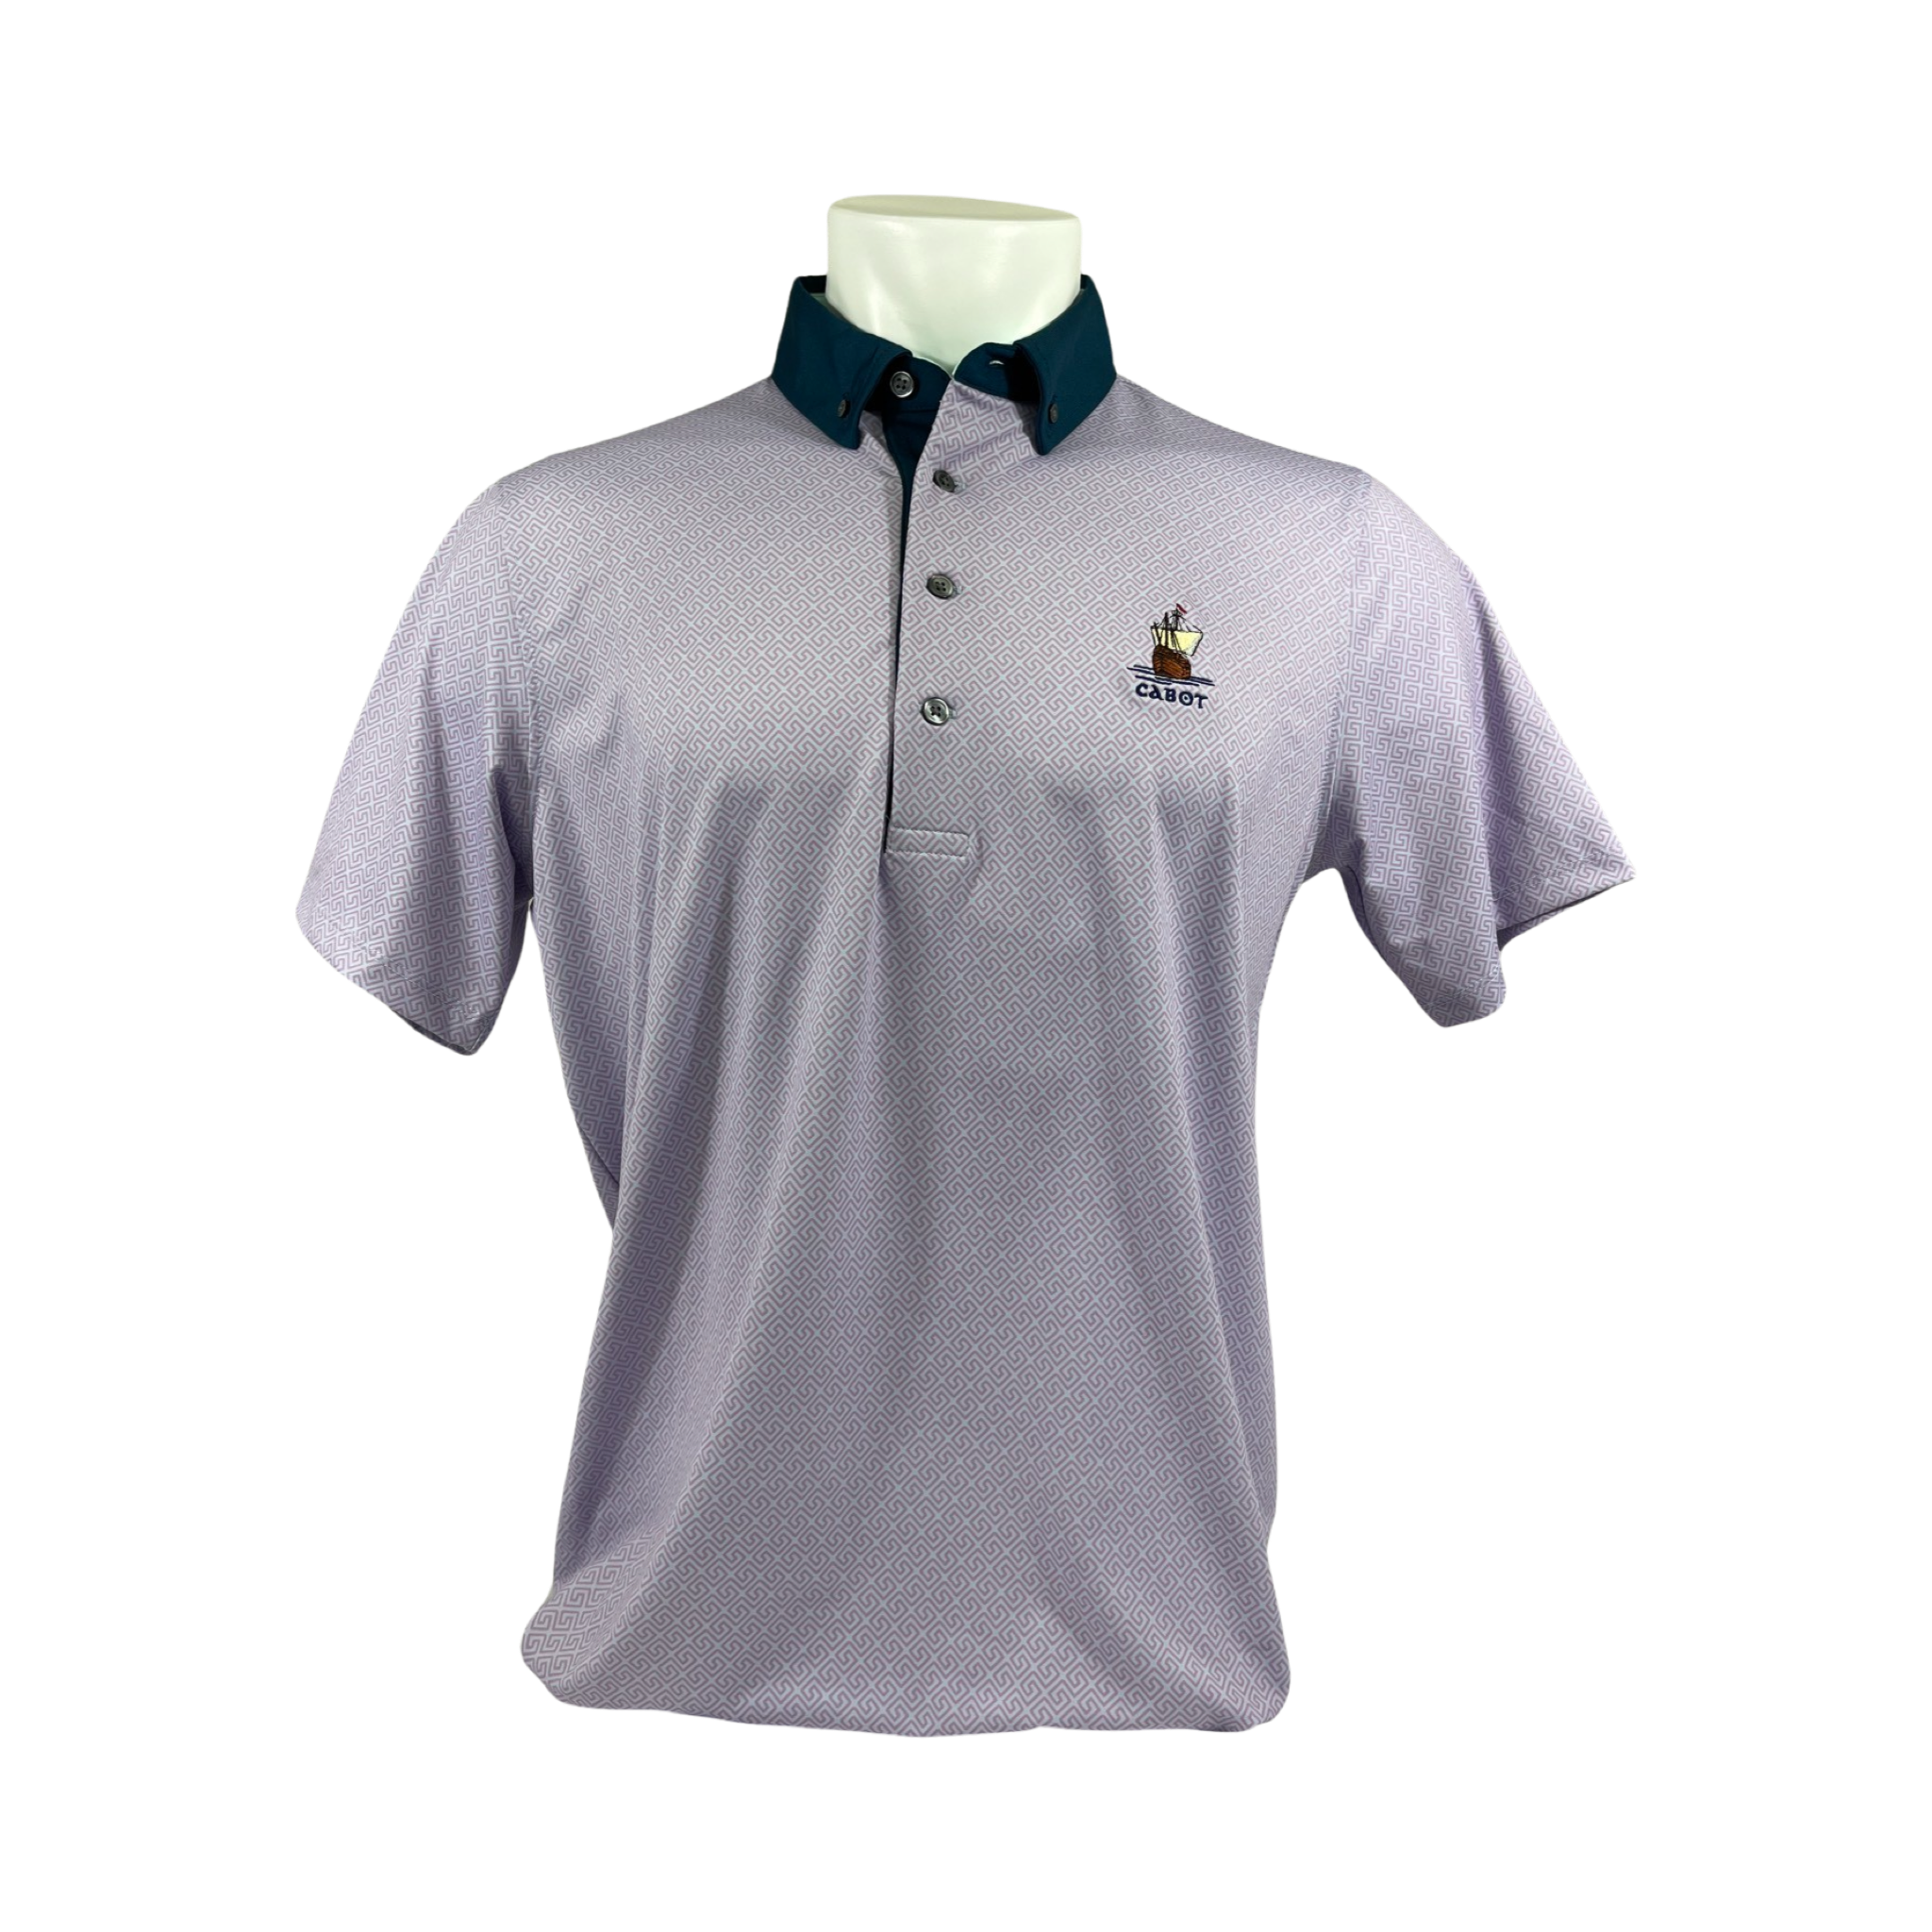 Greyson Cabot Links Waves Polo